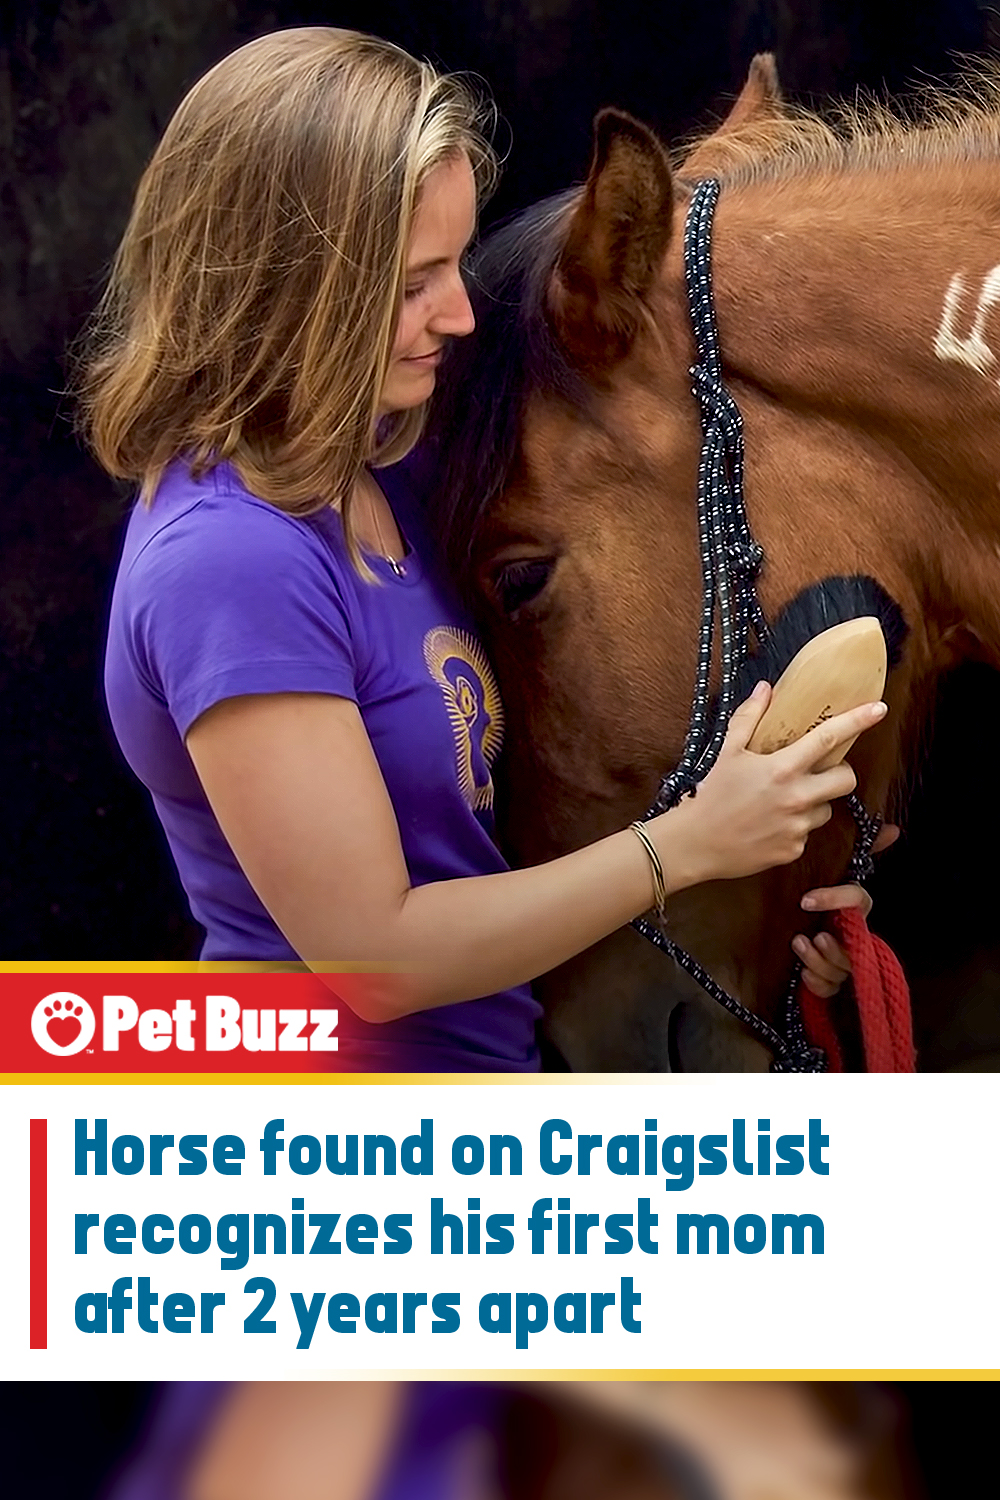 Horse found on Craigslist recognizes his first mom after 2 years apart